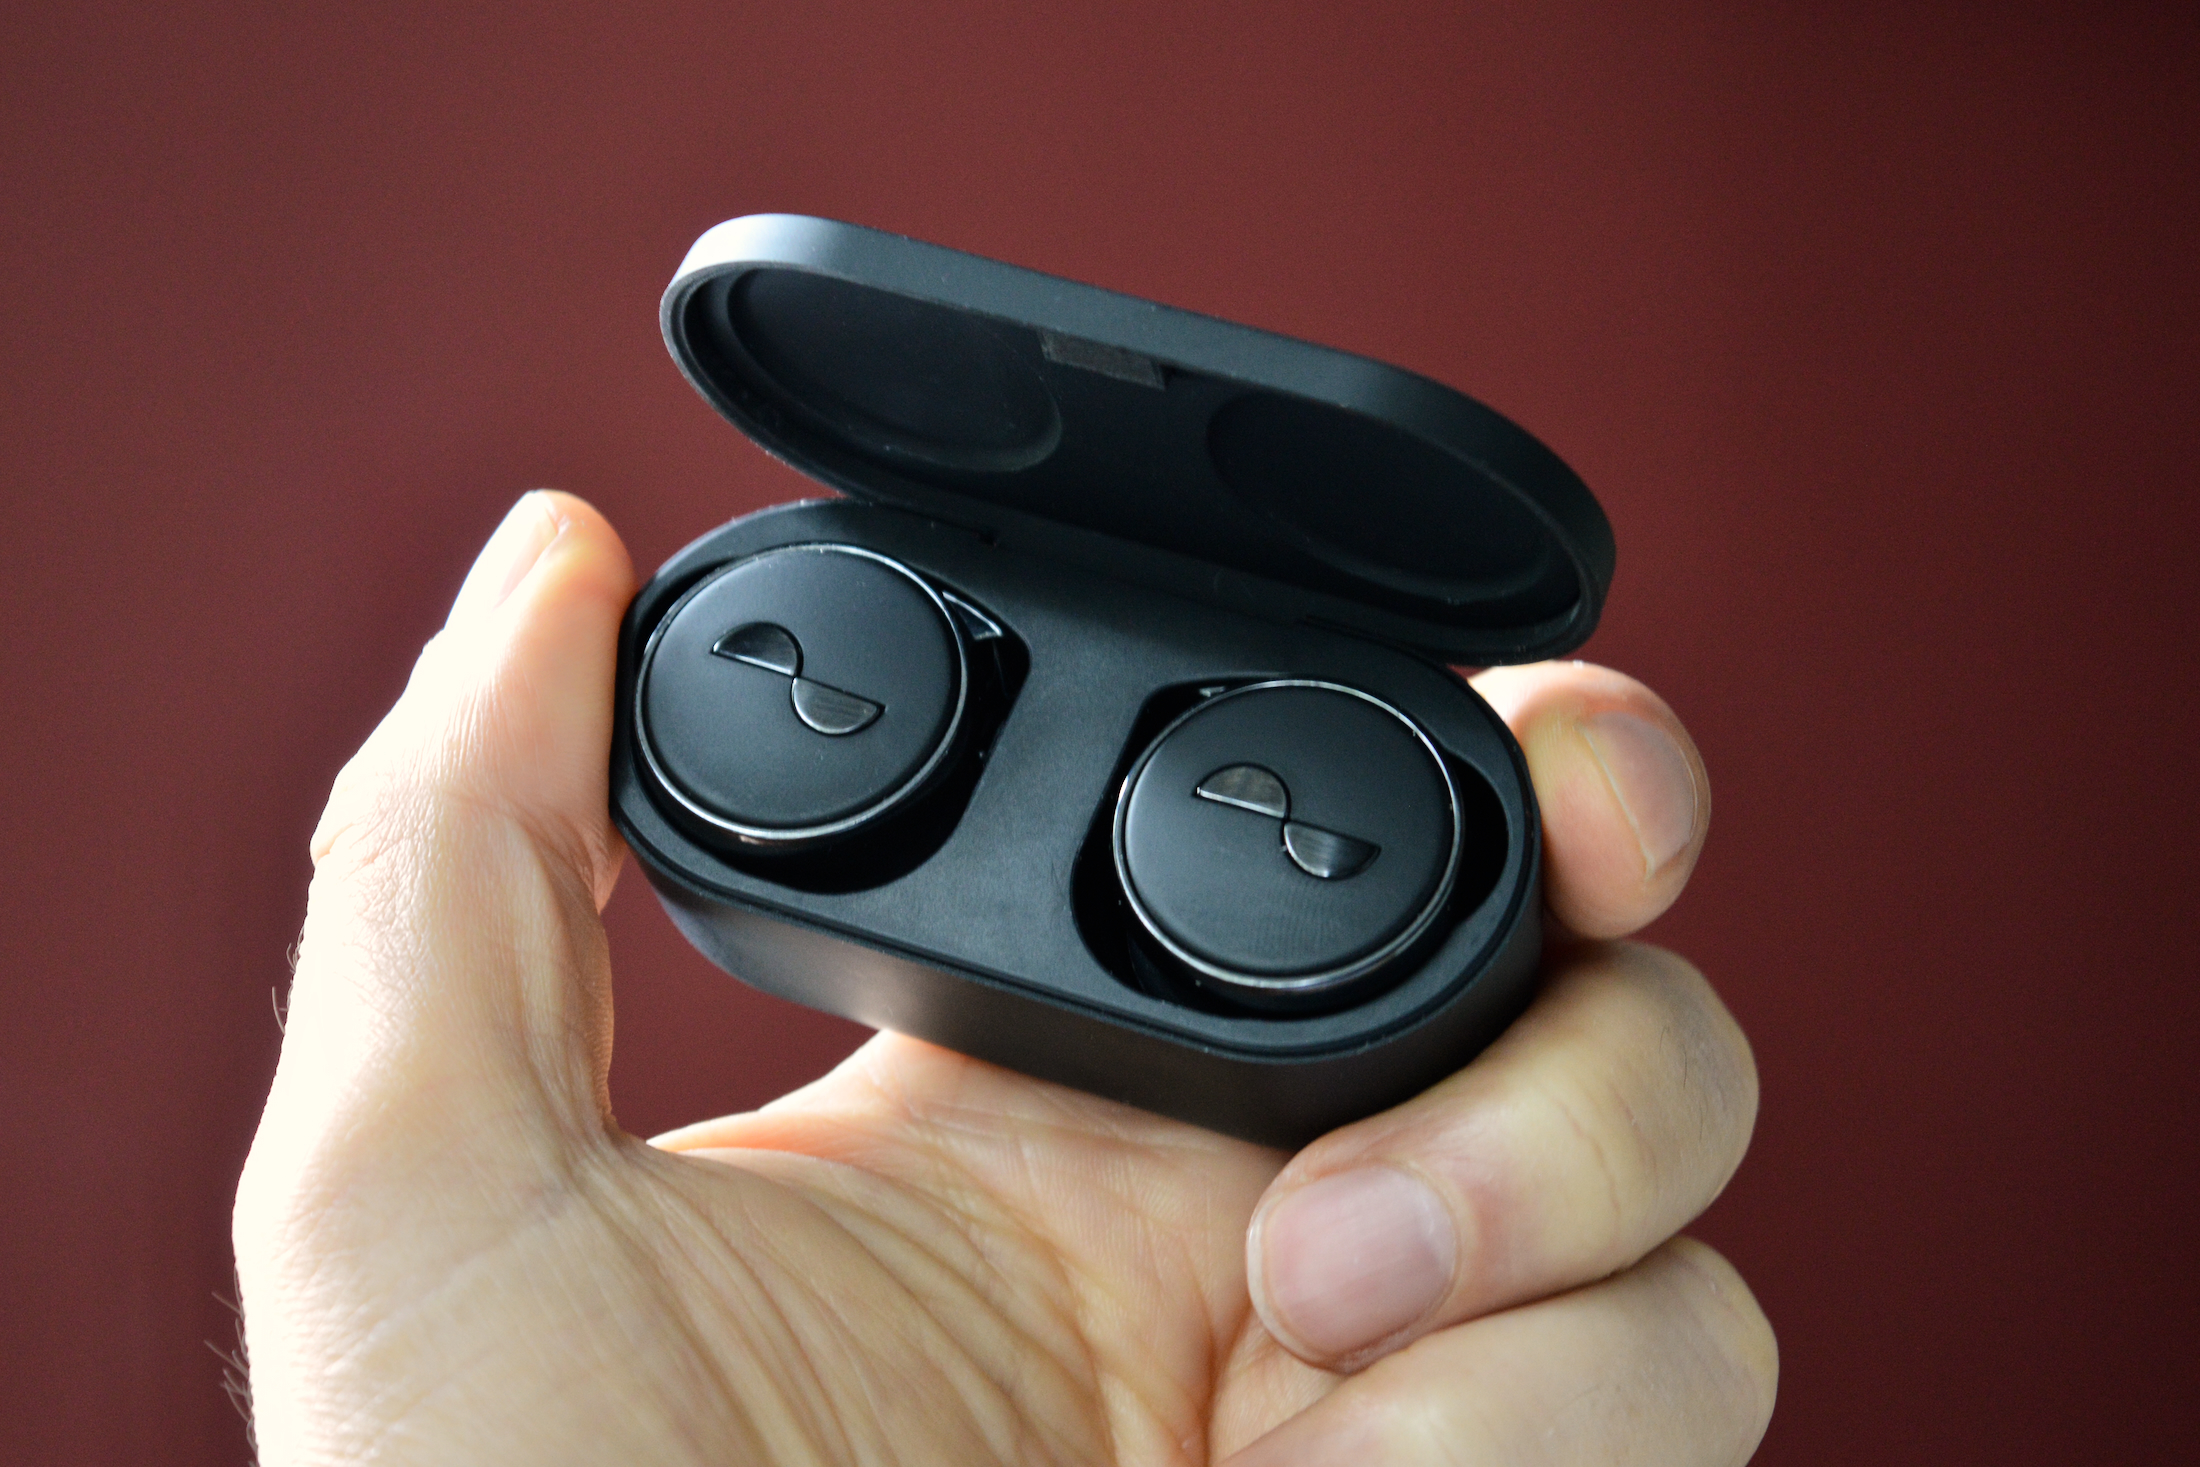 NuraTrue Pro hands-on review: The first lossless wireless earbuds